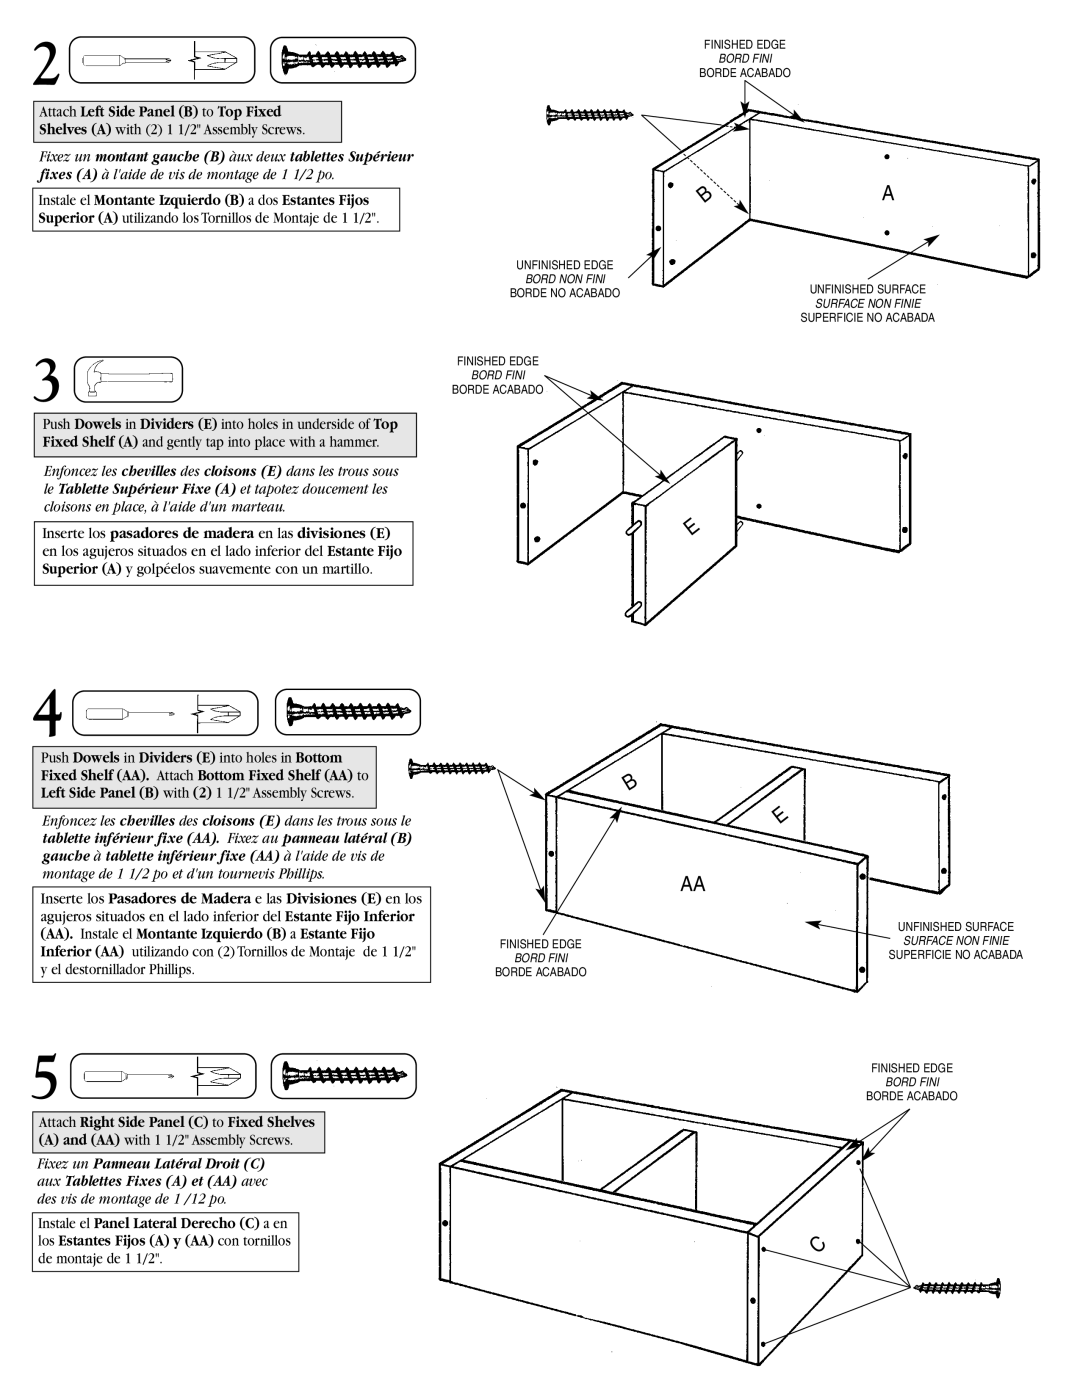 Closet Maid 10140 instruction sheet Attach Left Side Panel B to Top Fixed, Attach Right Side Panel C to Fixed Shelves 